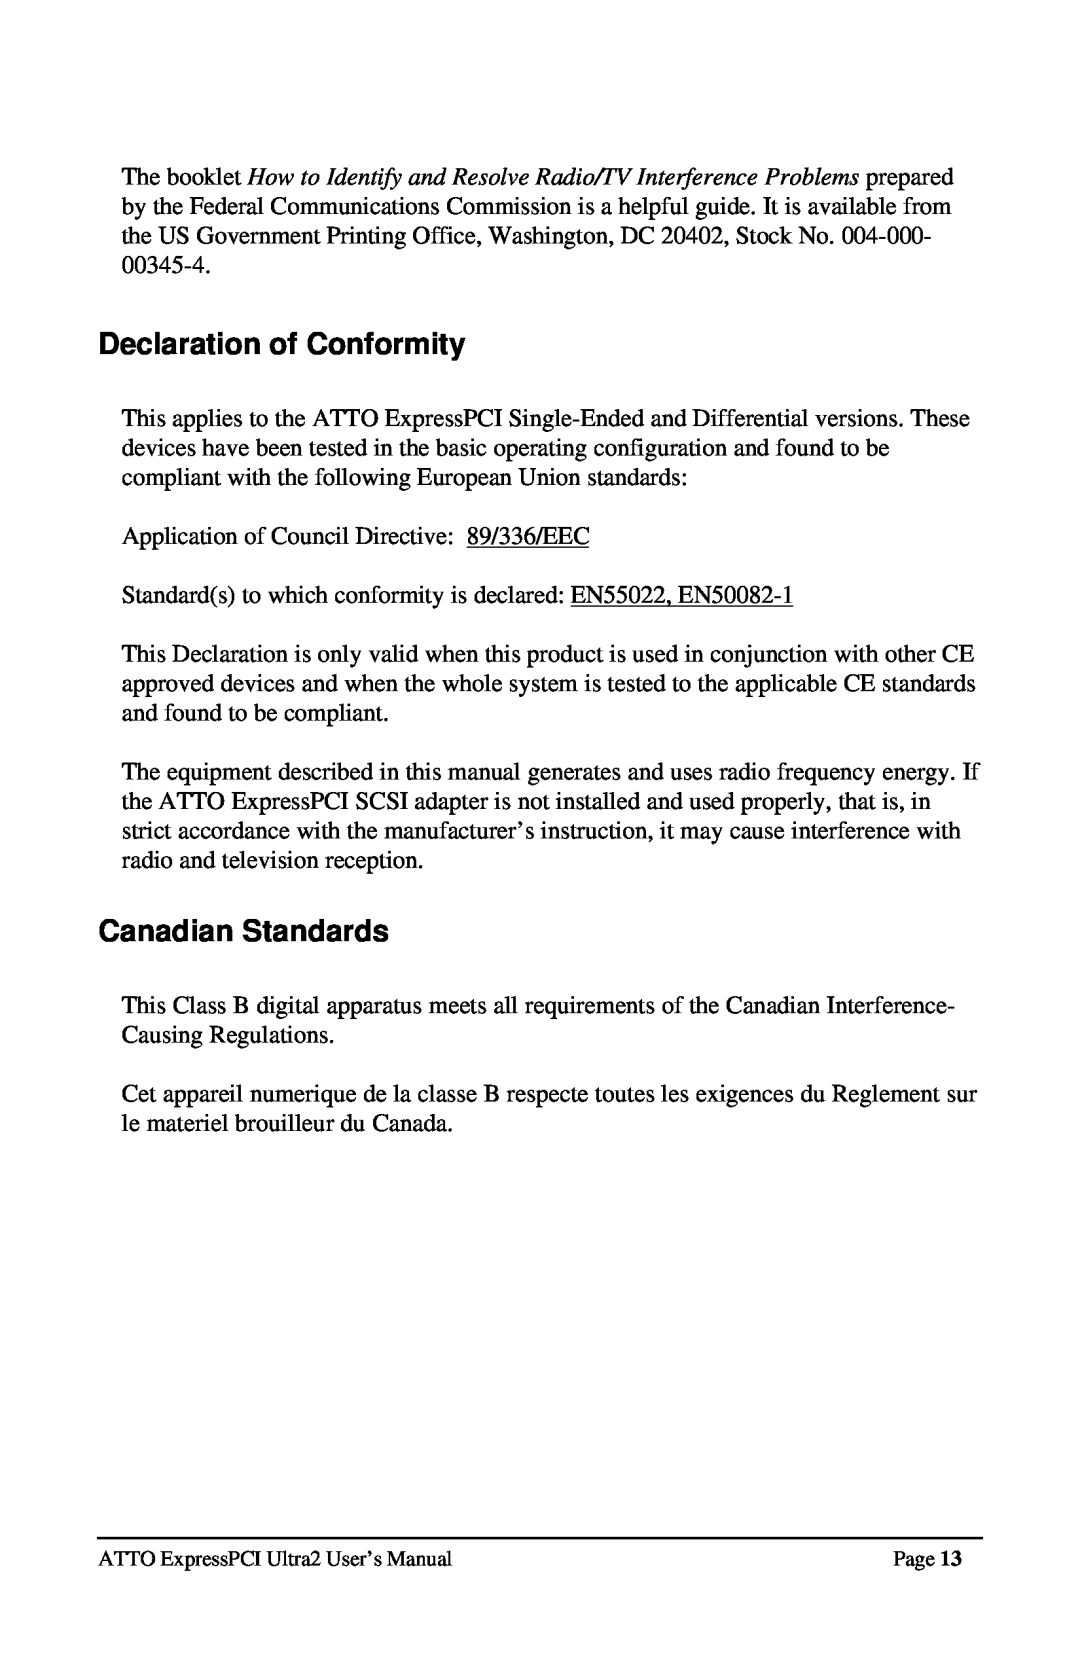 ATTO Technology UL25, UL2D user manual Declaration of Conformity, Canadian Standards 